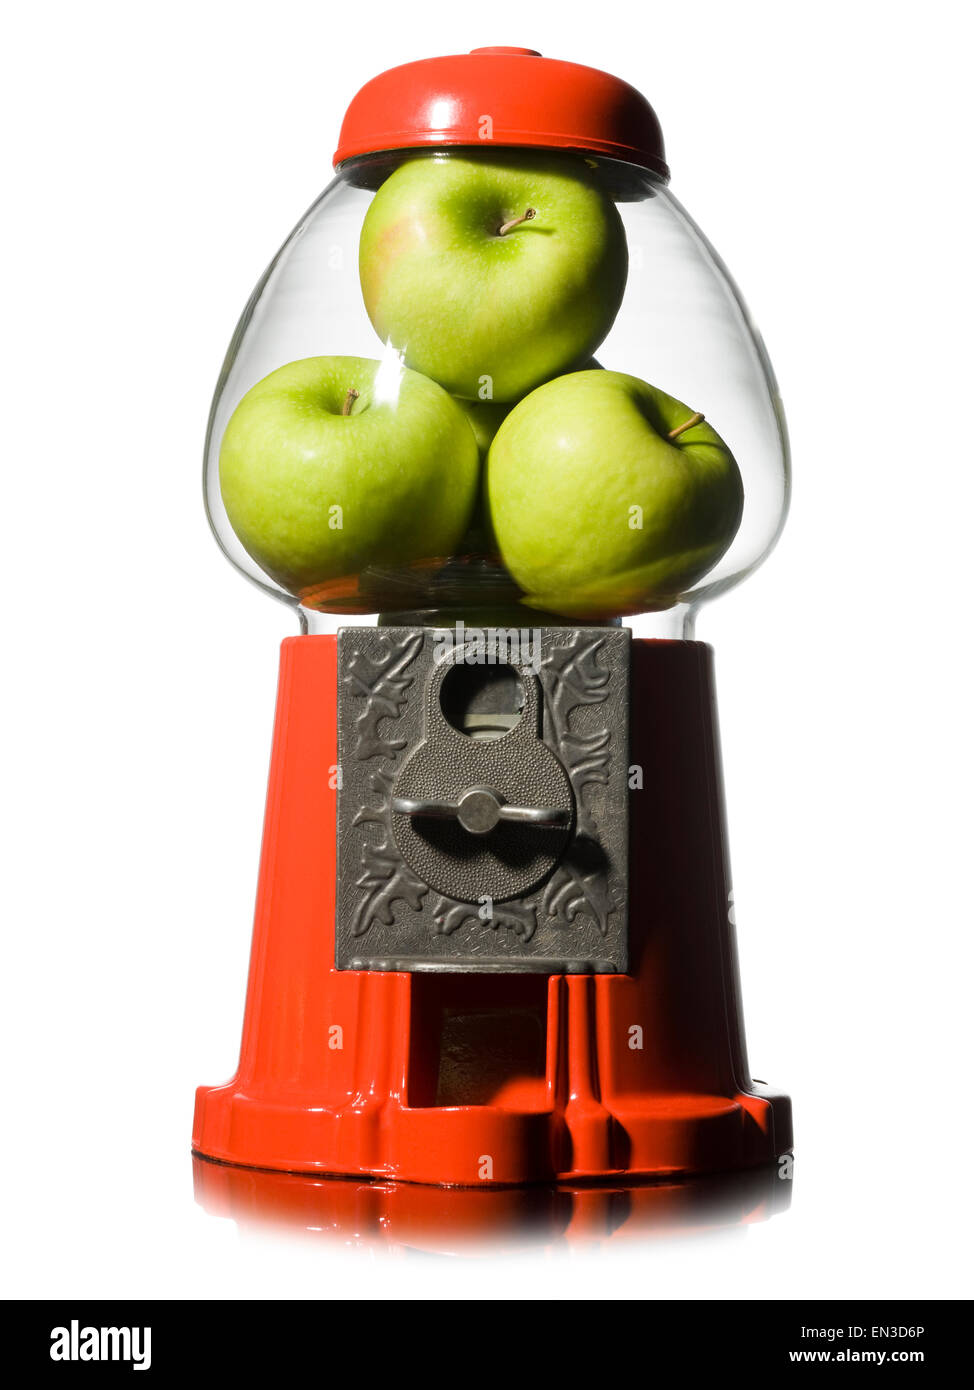 green apples in a gumball machine Stock Photo